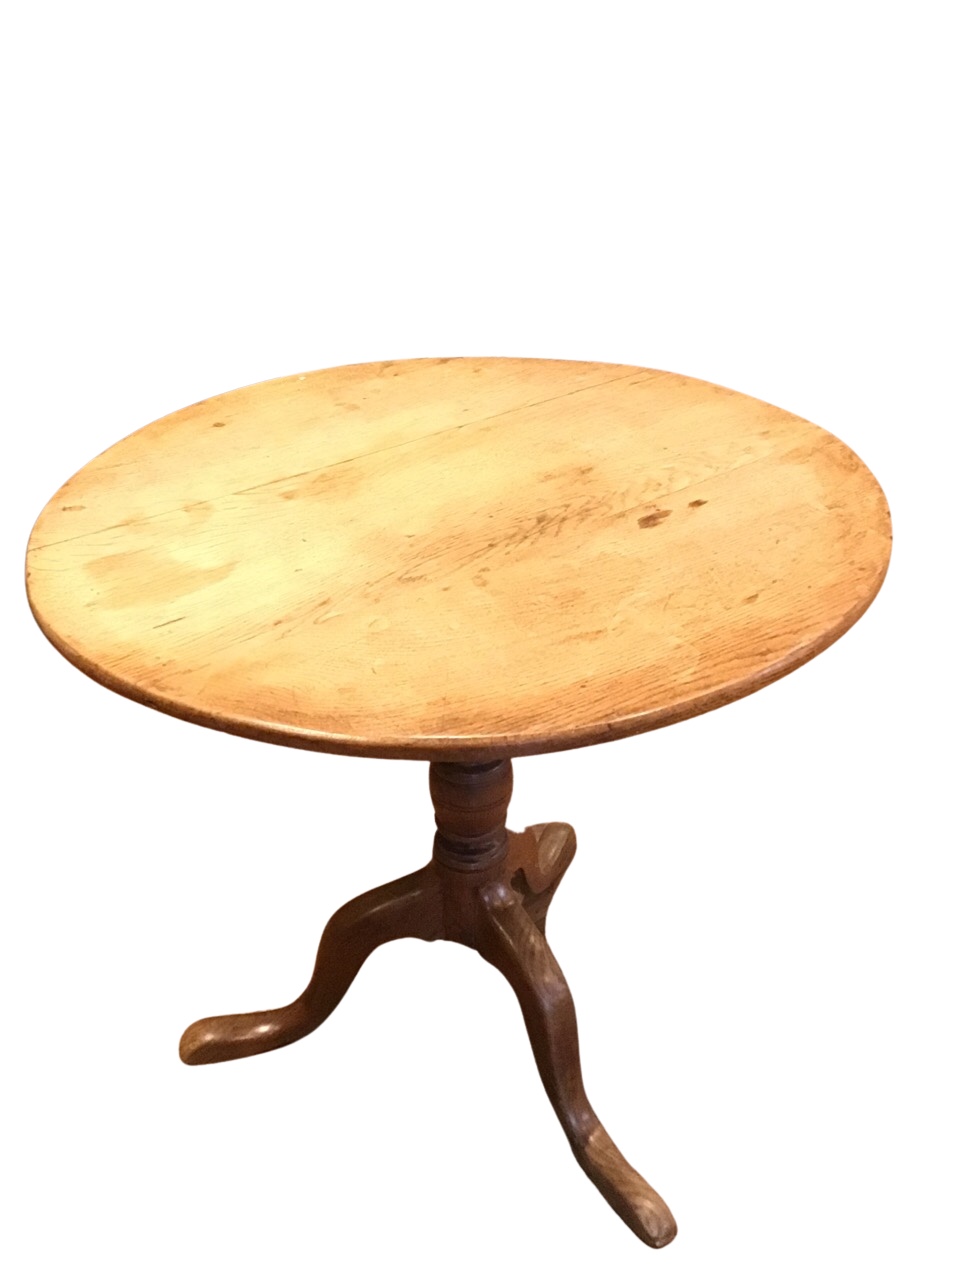 A circular Georgian oak snap-top occasional table supported on a turned column, with tripartite legs - Image 2 of 3